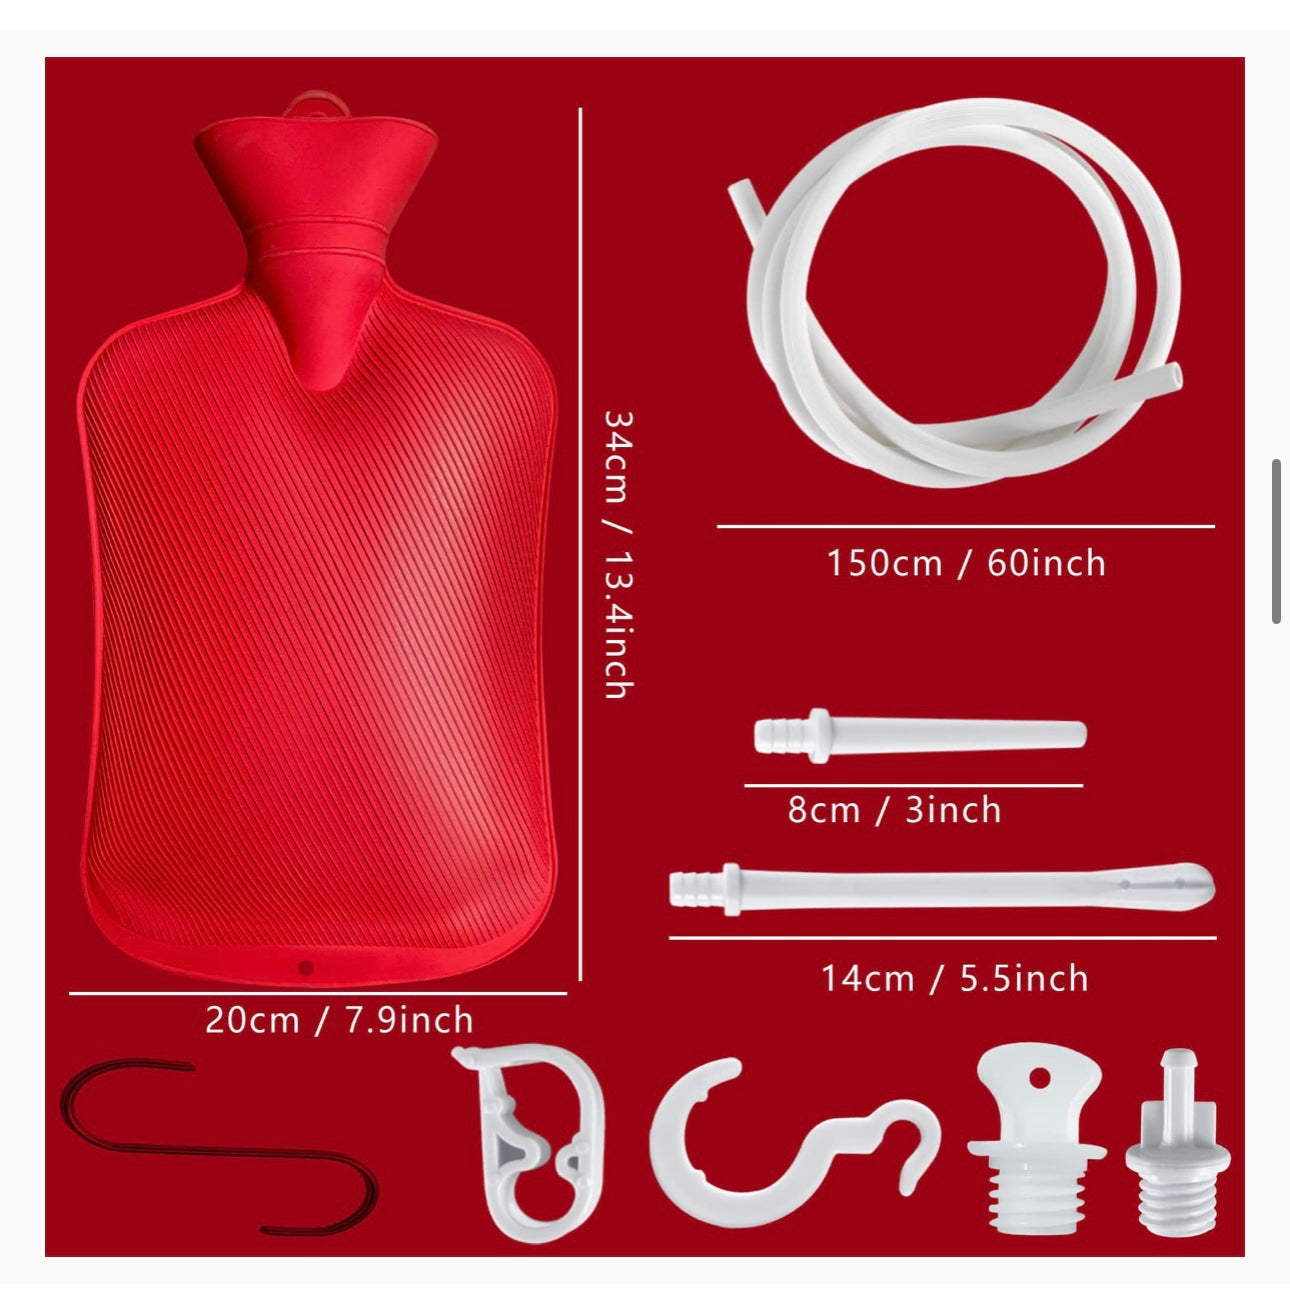 Enema Bag Kit for Colon Cleansing with Silicone Hose (2 Liters, Open Top) - Red